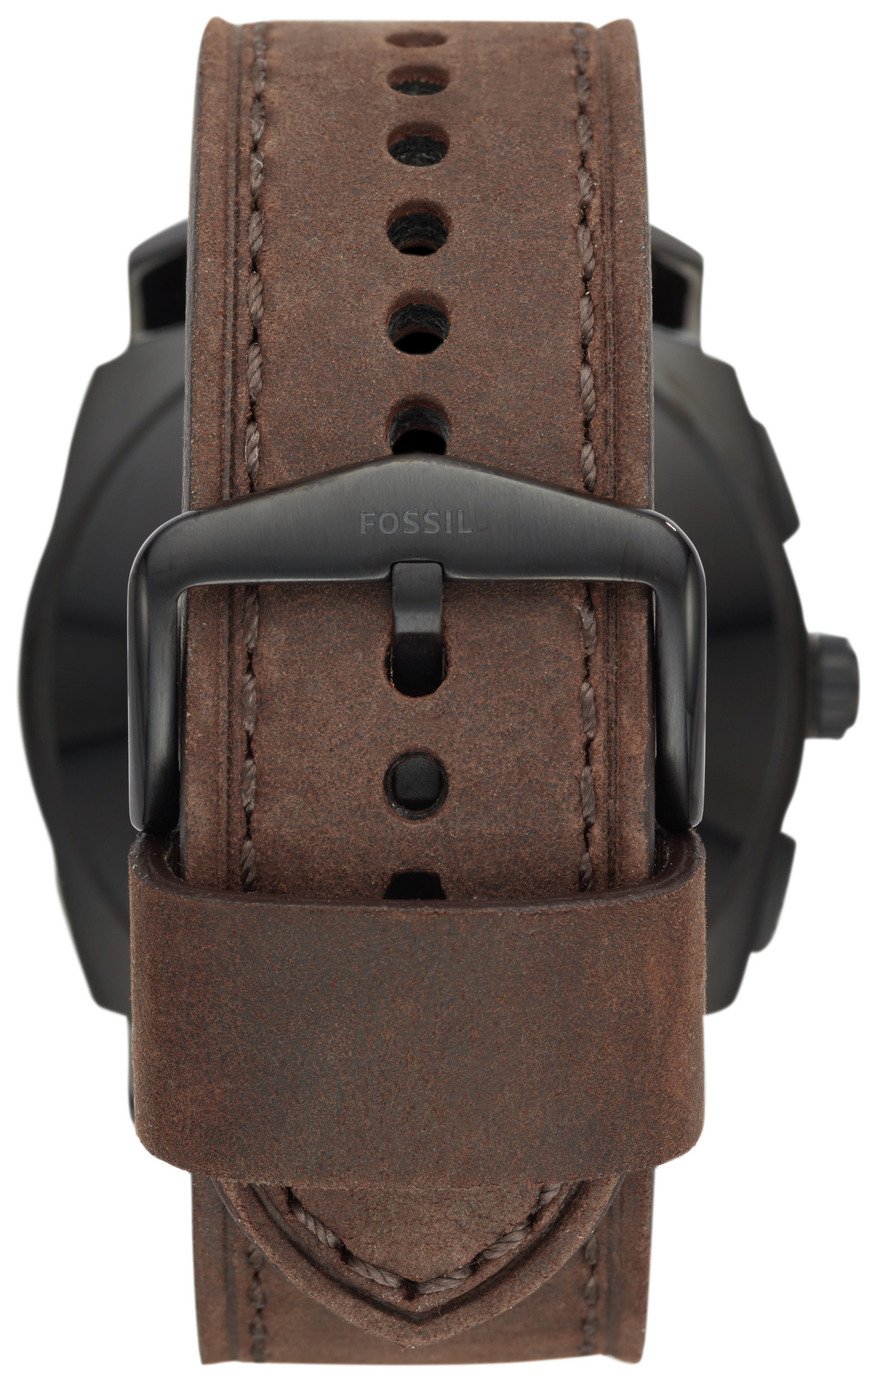 Fossil Machine Hybrid Men's Brown Leather Smart Watch Review